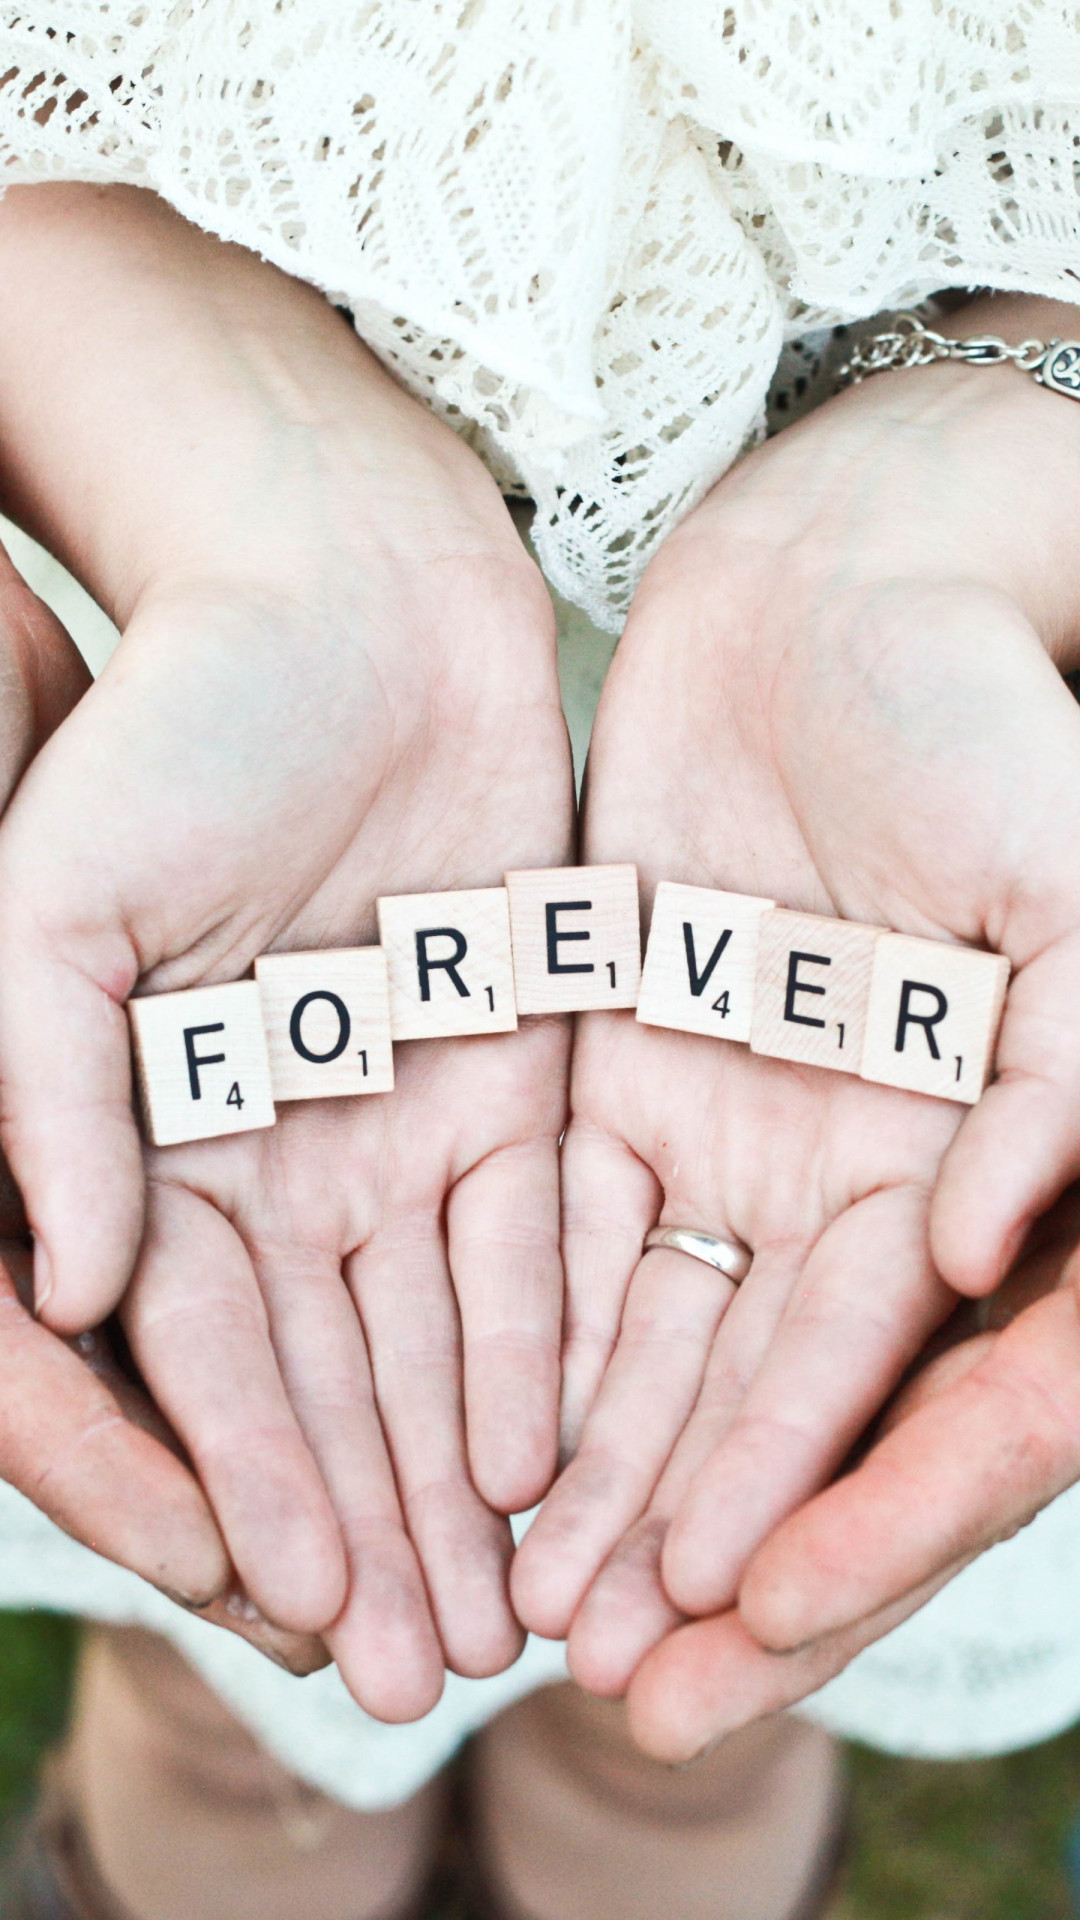 Forever message in their hands wallpaper 1080x1920